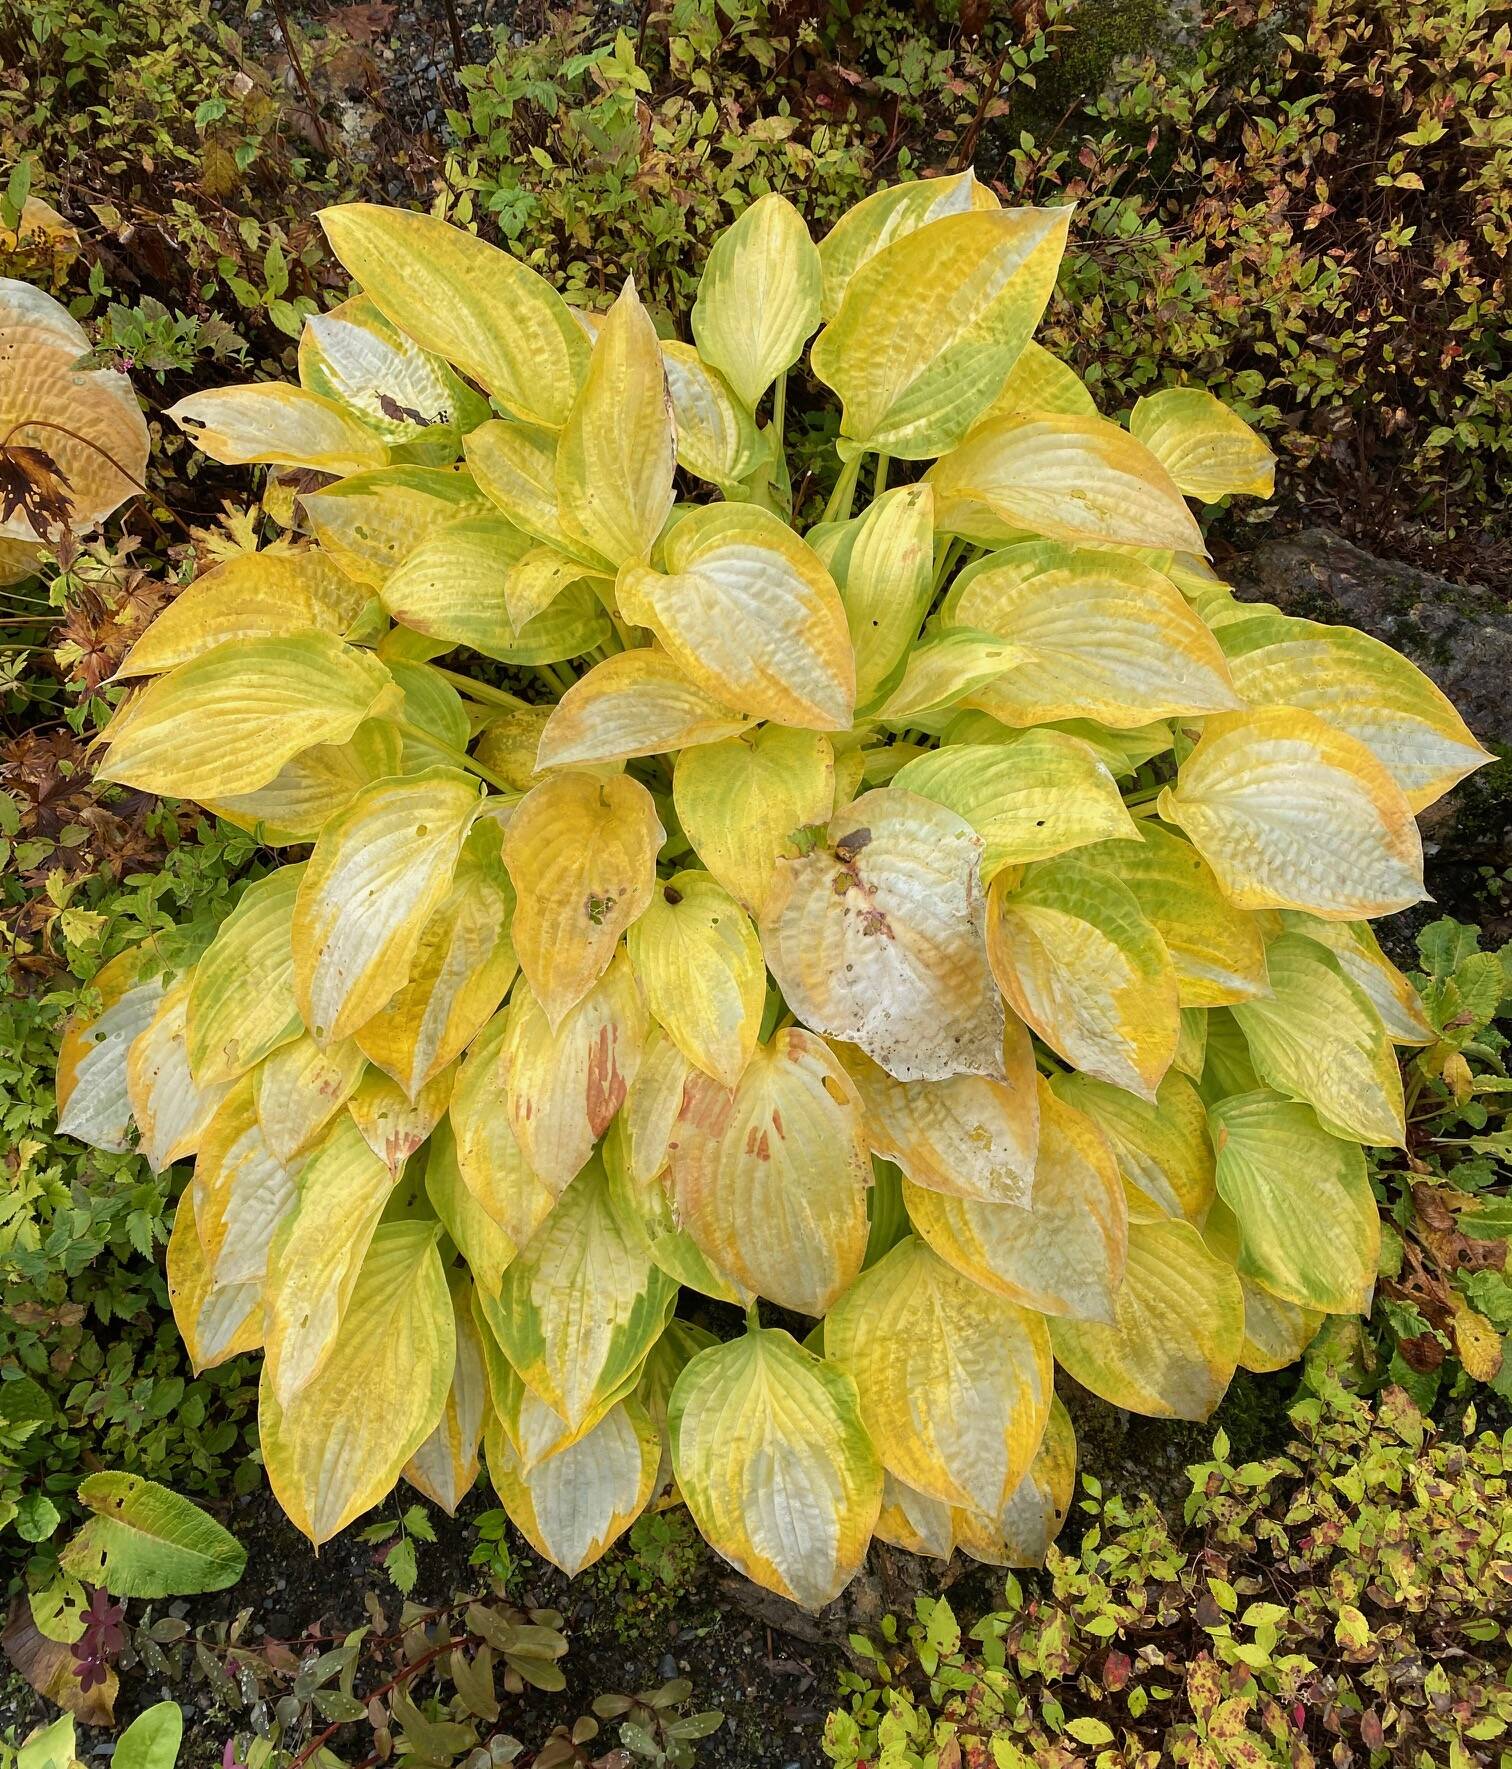 The fall look of a hosta seen above Pioneer Road on Sept. 26. (Photo by Denise Carroll)